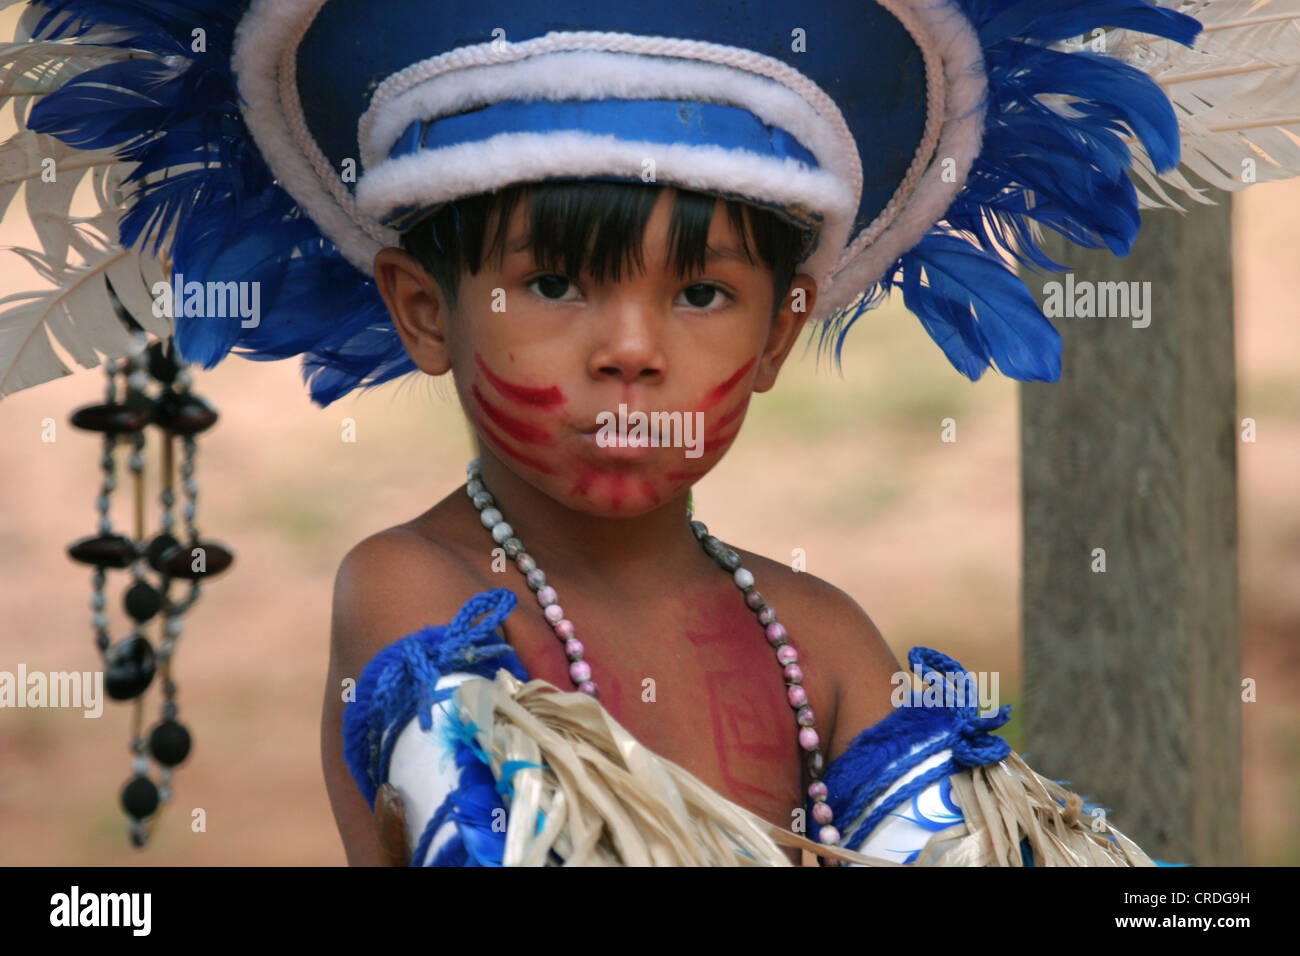 Young boy dressed in typical native ceremonial dress from the Amazon region of Brazil Stock Photo